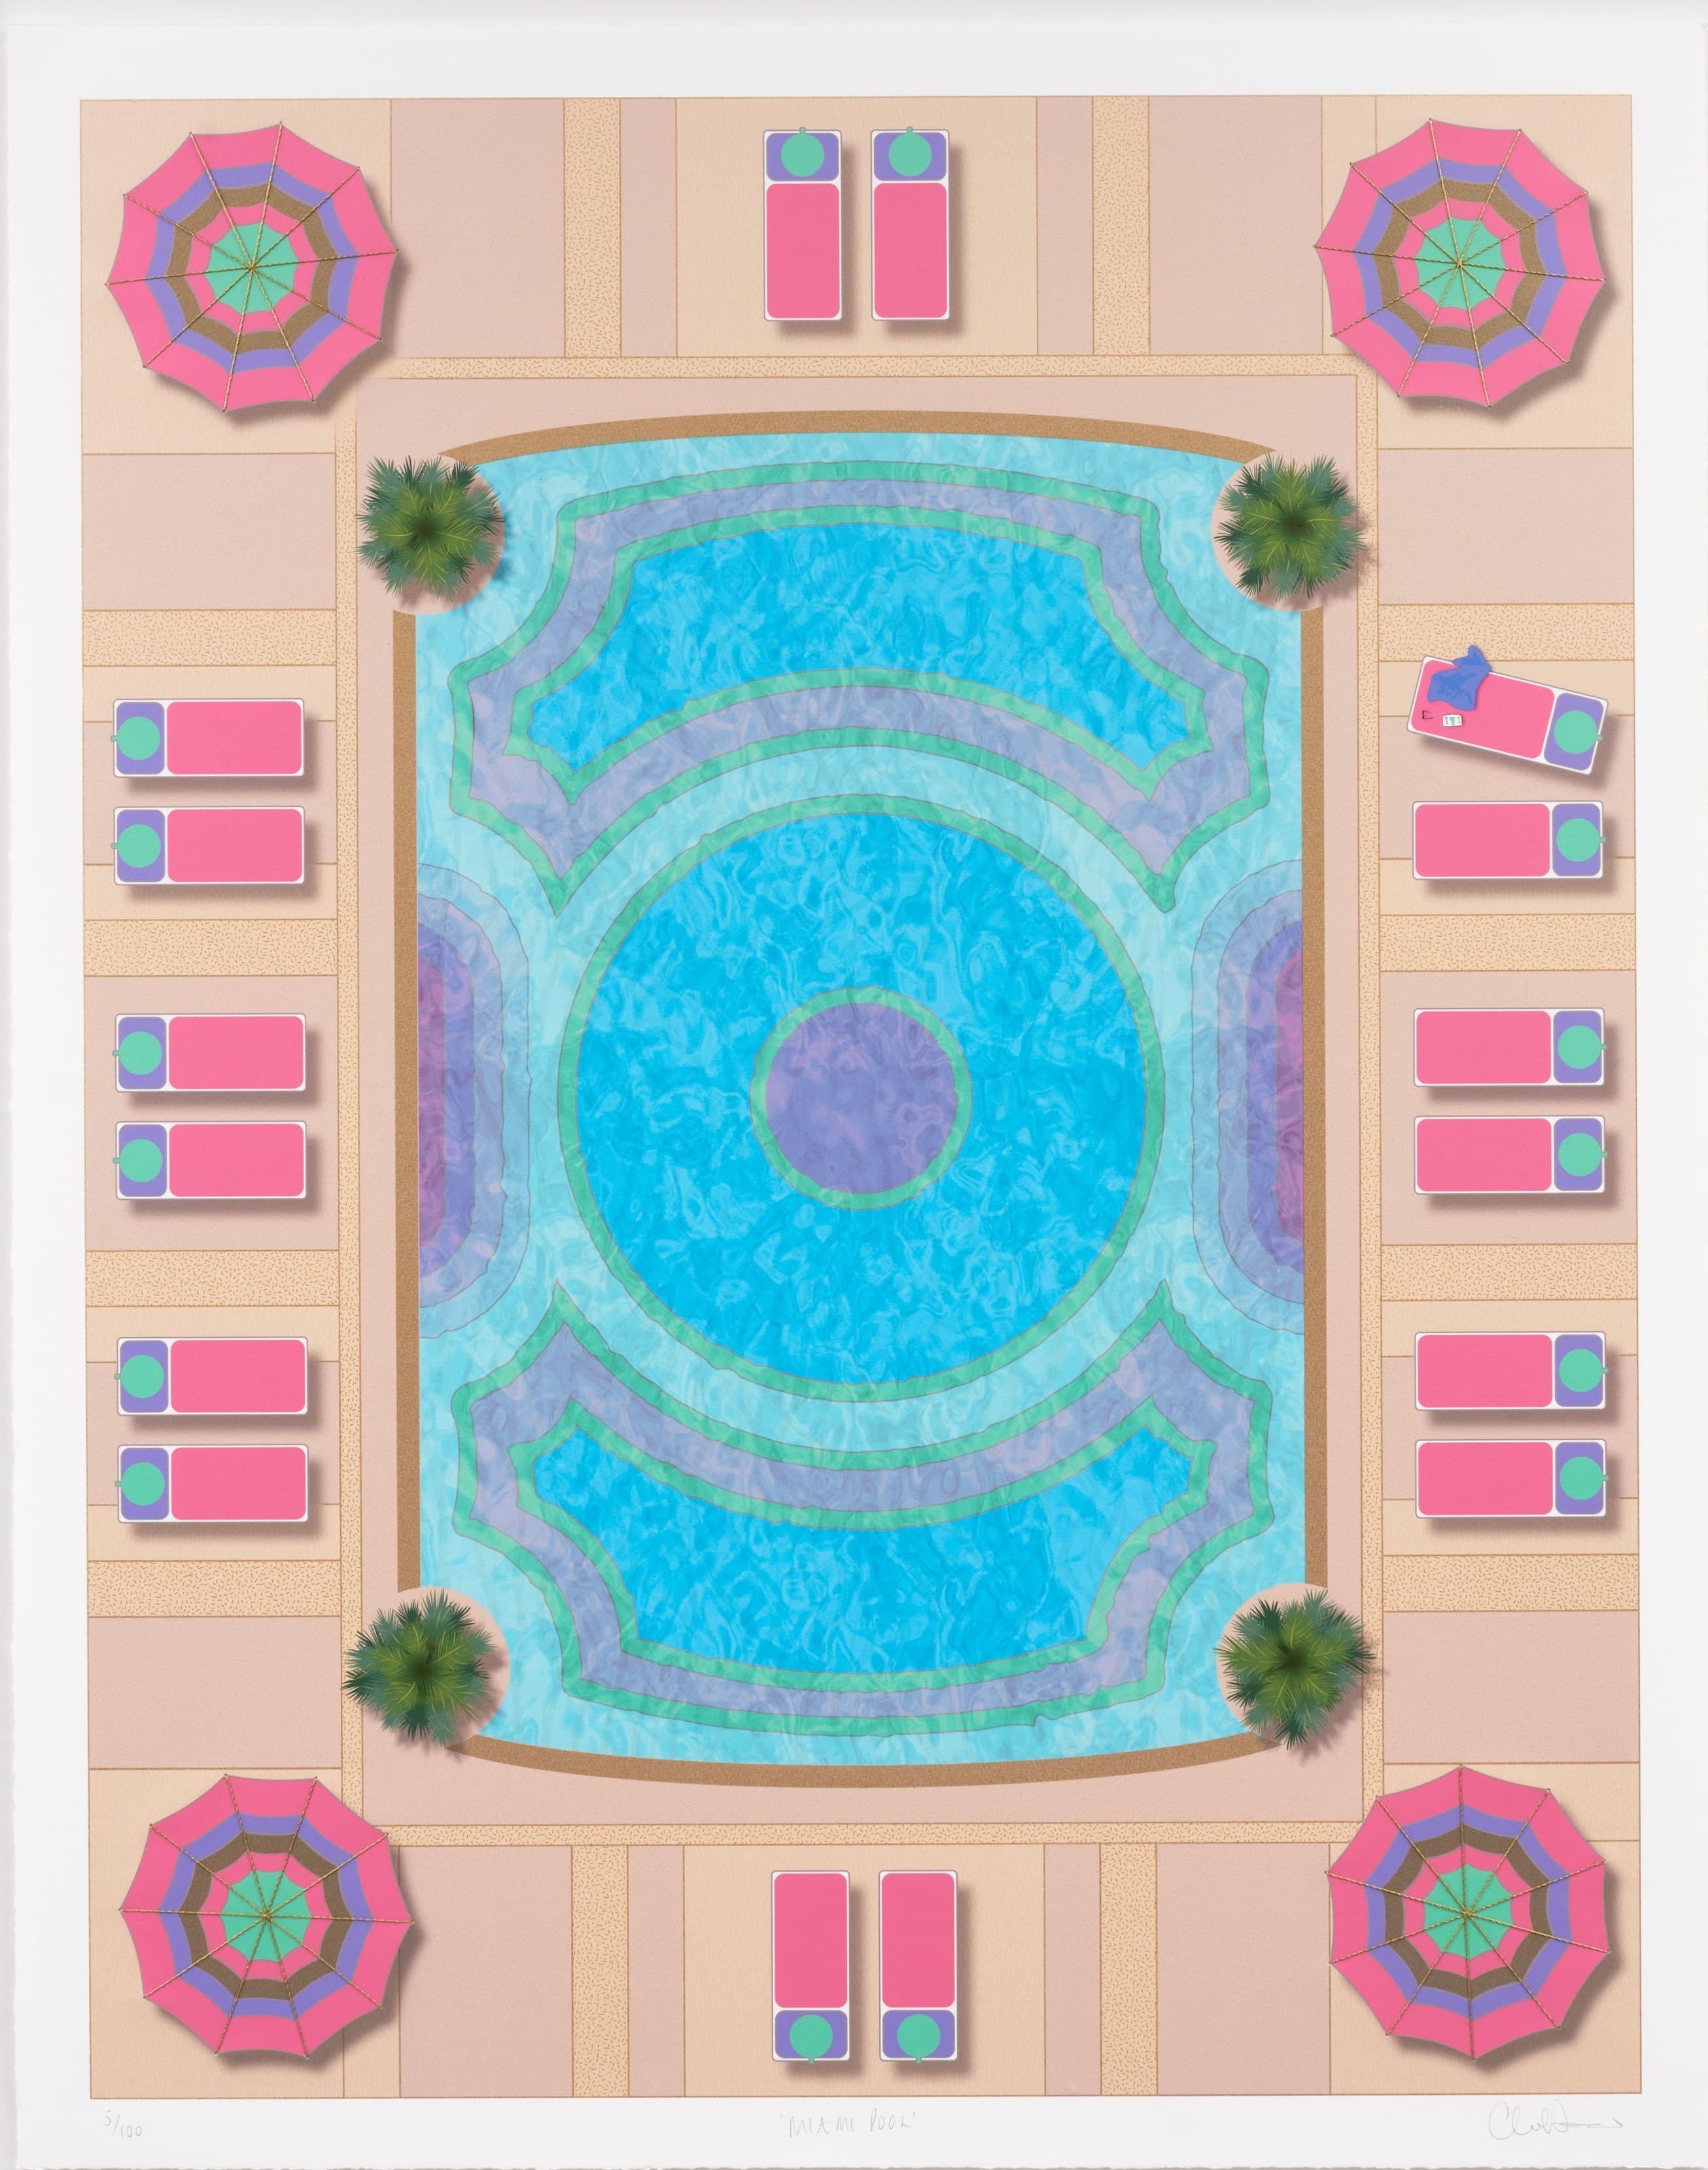 Image of Miami Pool artwork by Cleo Barbour, free delivery